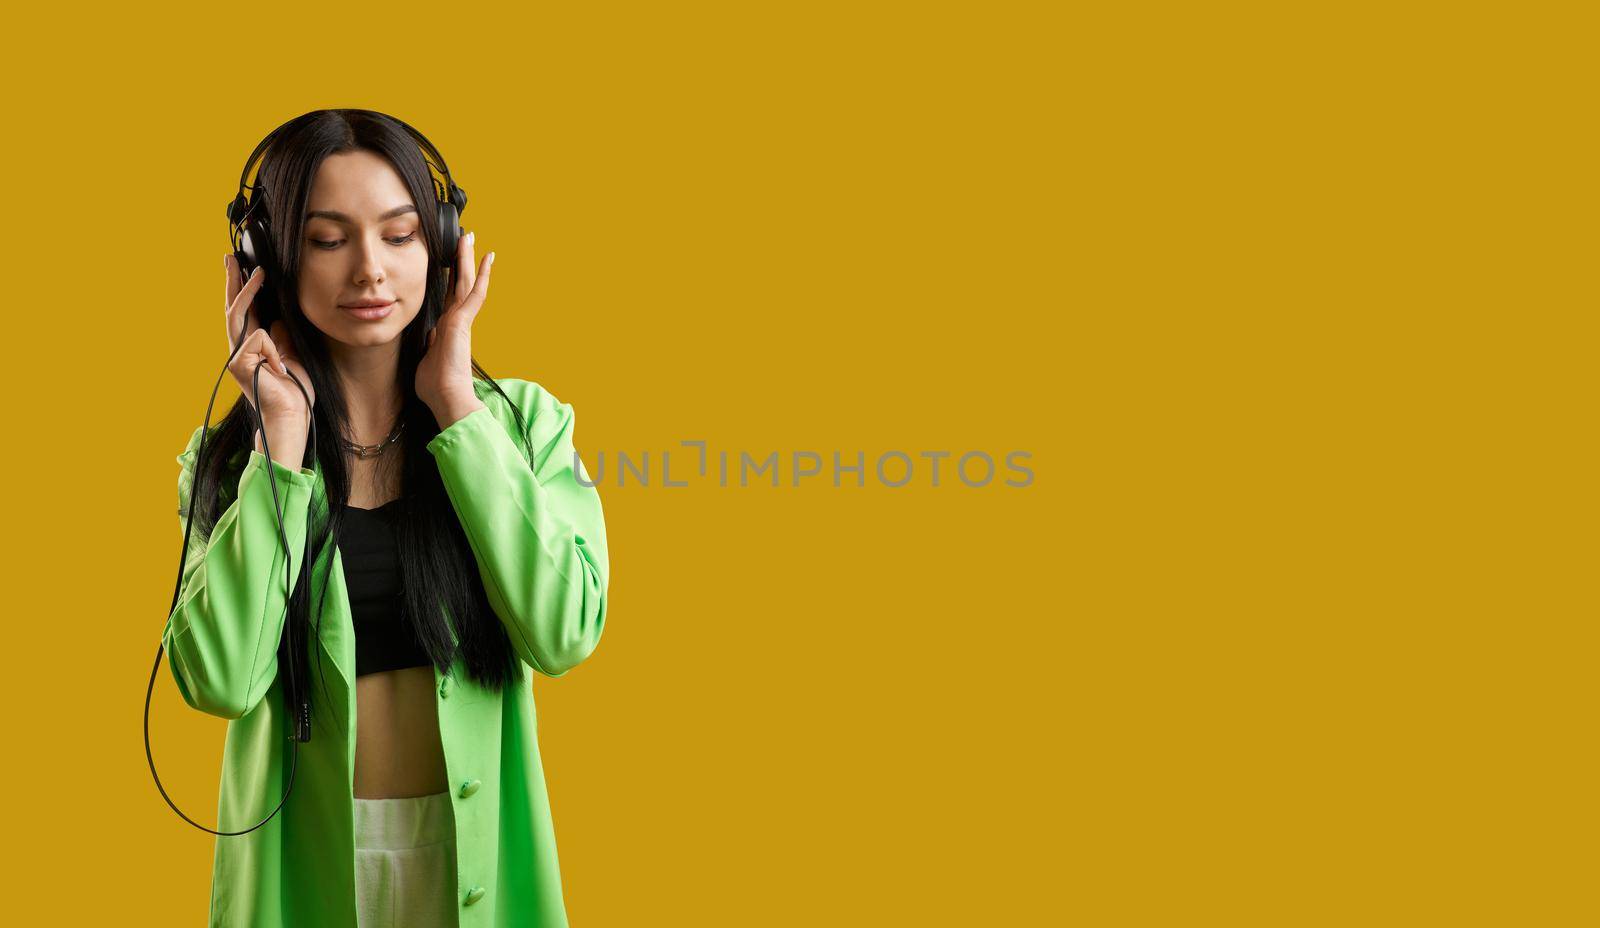 Front view of girl wearng green suit, standing, listening to music. Pretty brunette woman with long hair enjoying music with closed eyes, smiling. Concept of modern life.